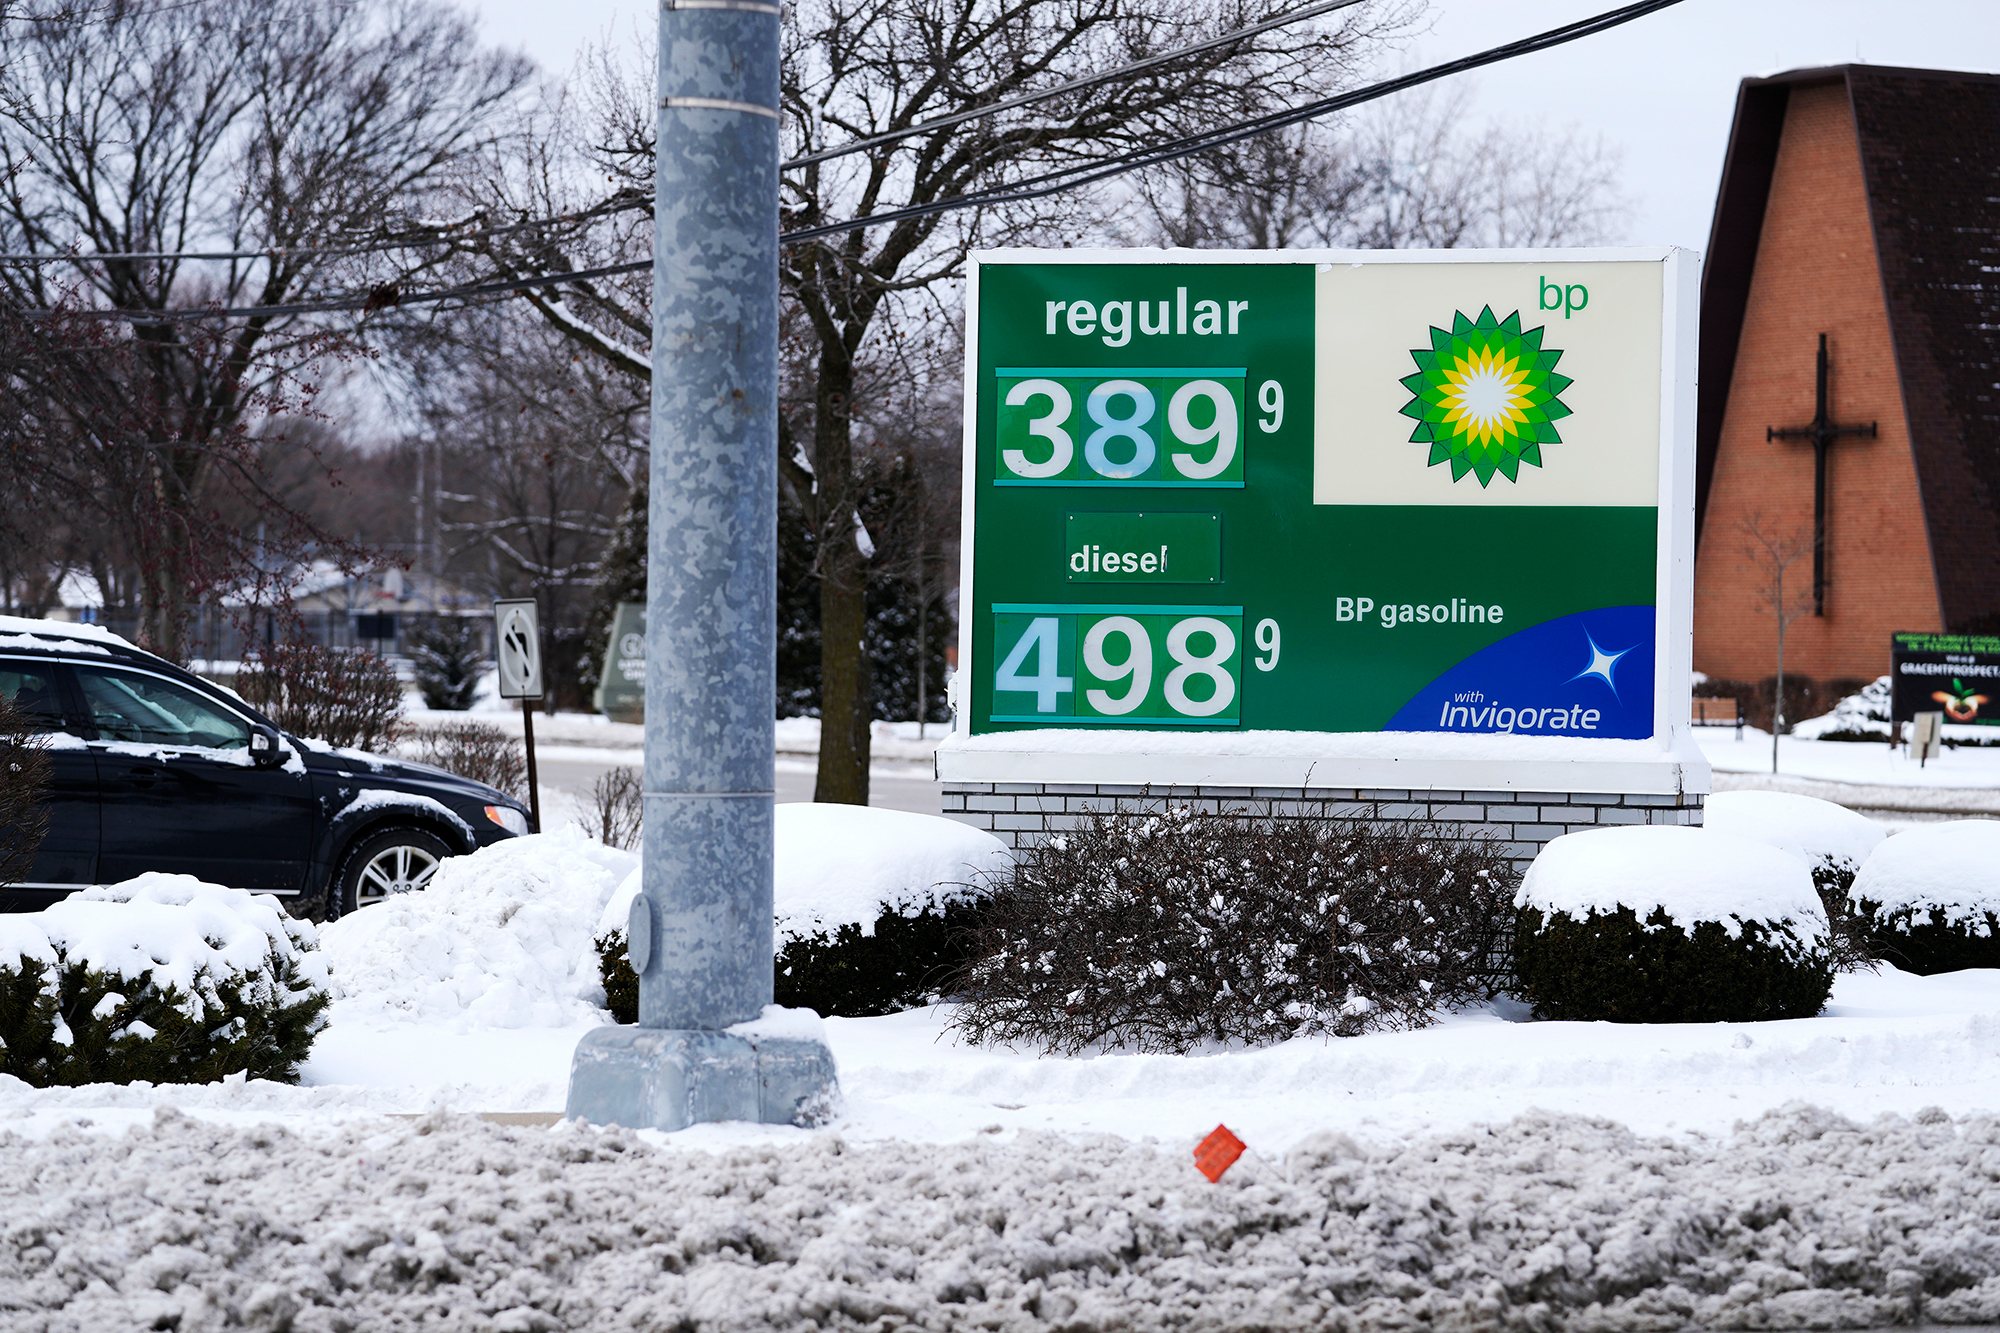 Gas prices are displayed at a BP gas station in Mount Prospect, Illinois on Sunday, January 29.